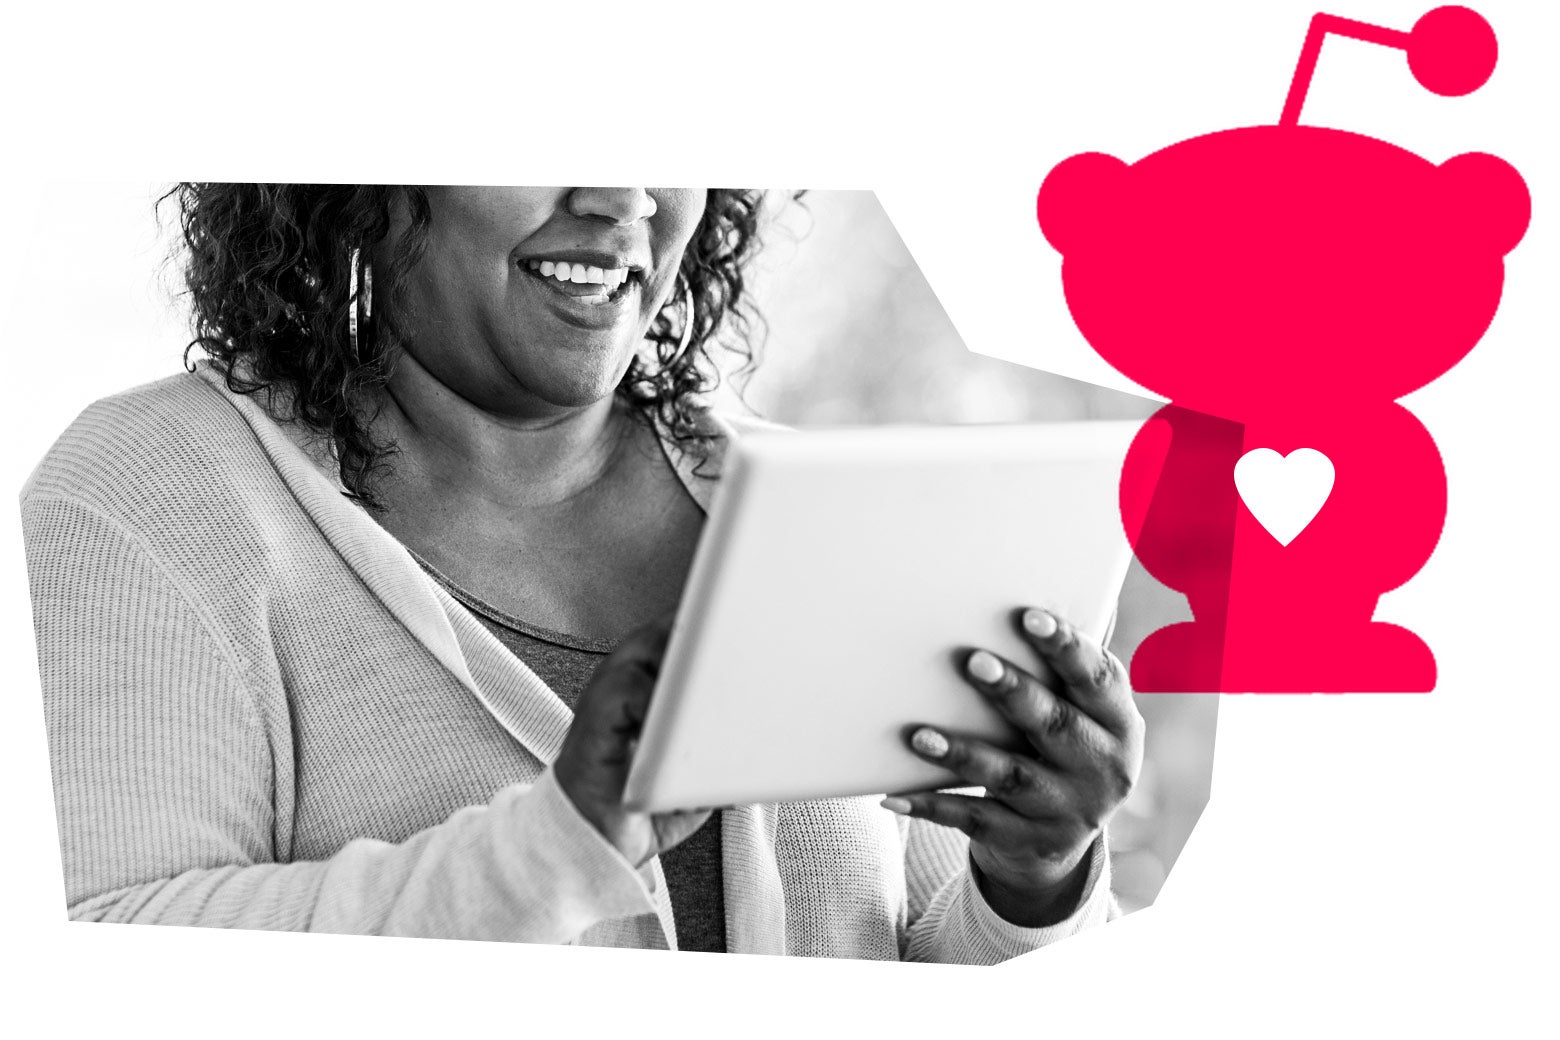 A Black woman smiles while looking at her tablet. A Reddit logo is in the background.